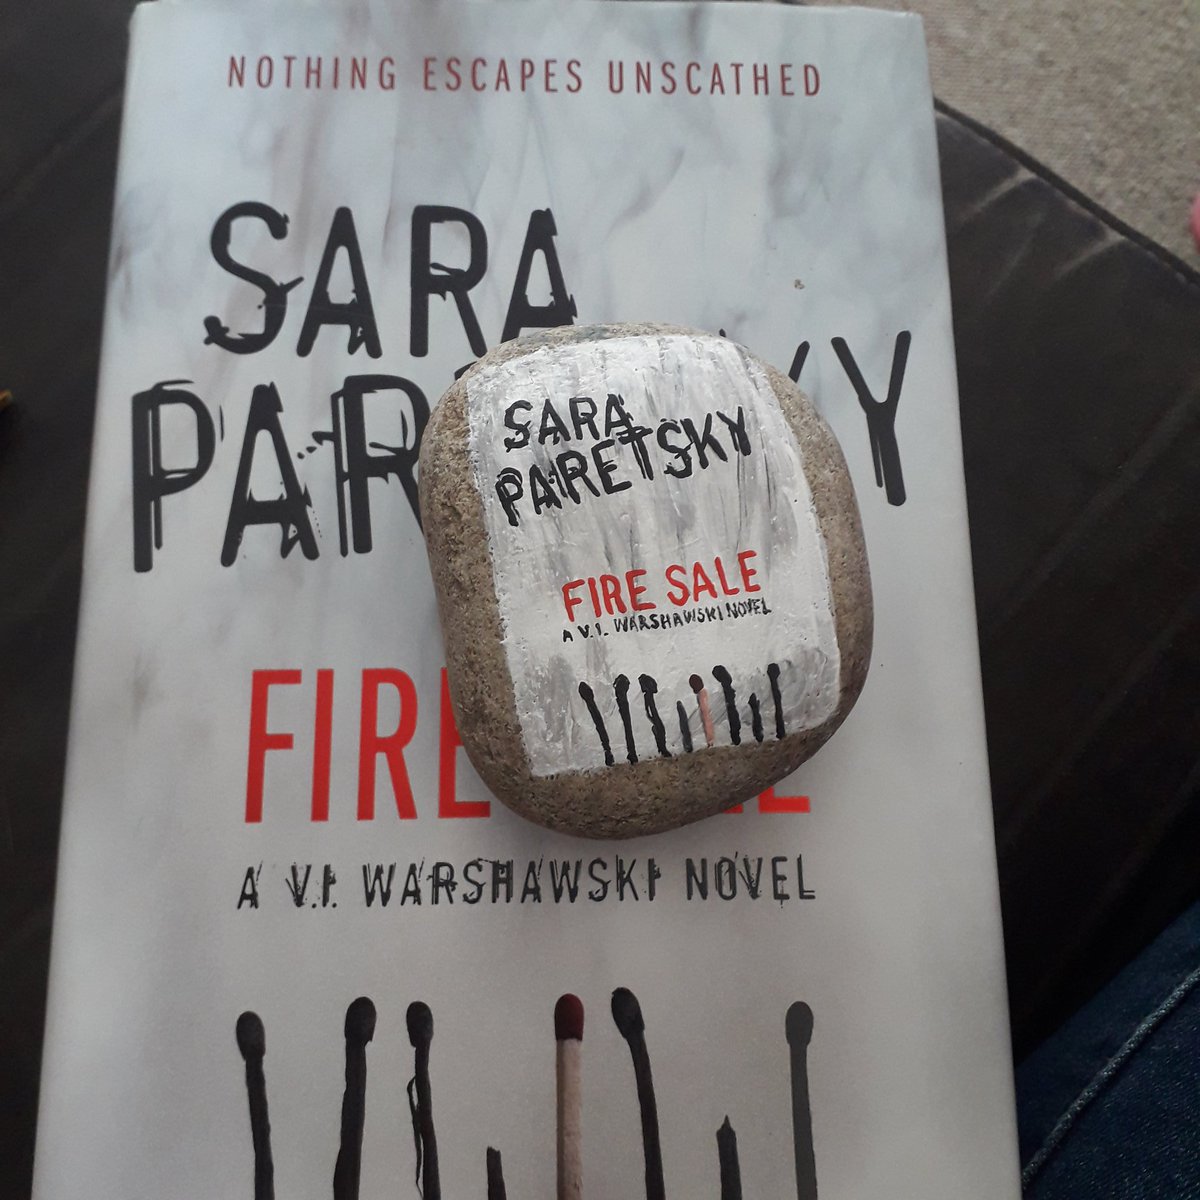 A little VI Warshawski on a rock. I've been following this series for 20 years. Fire Sale by  @SaraParetsky painted on a rock to be hidden in my library